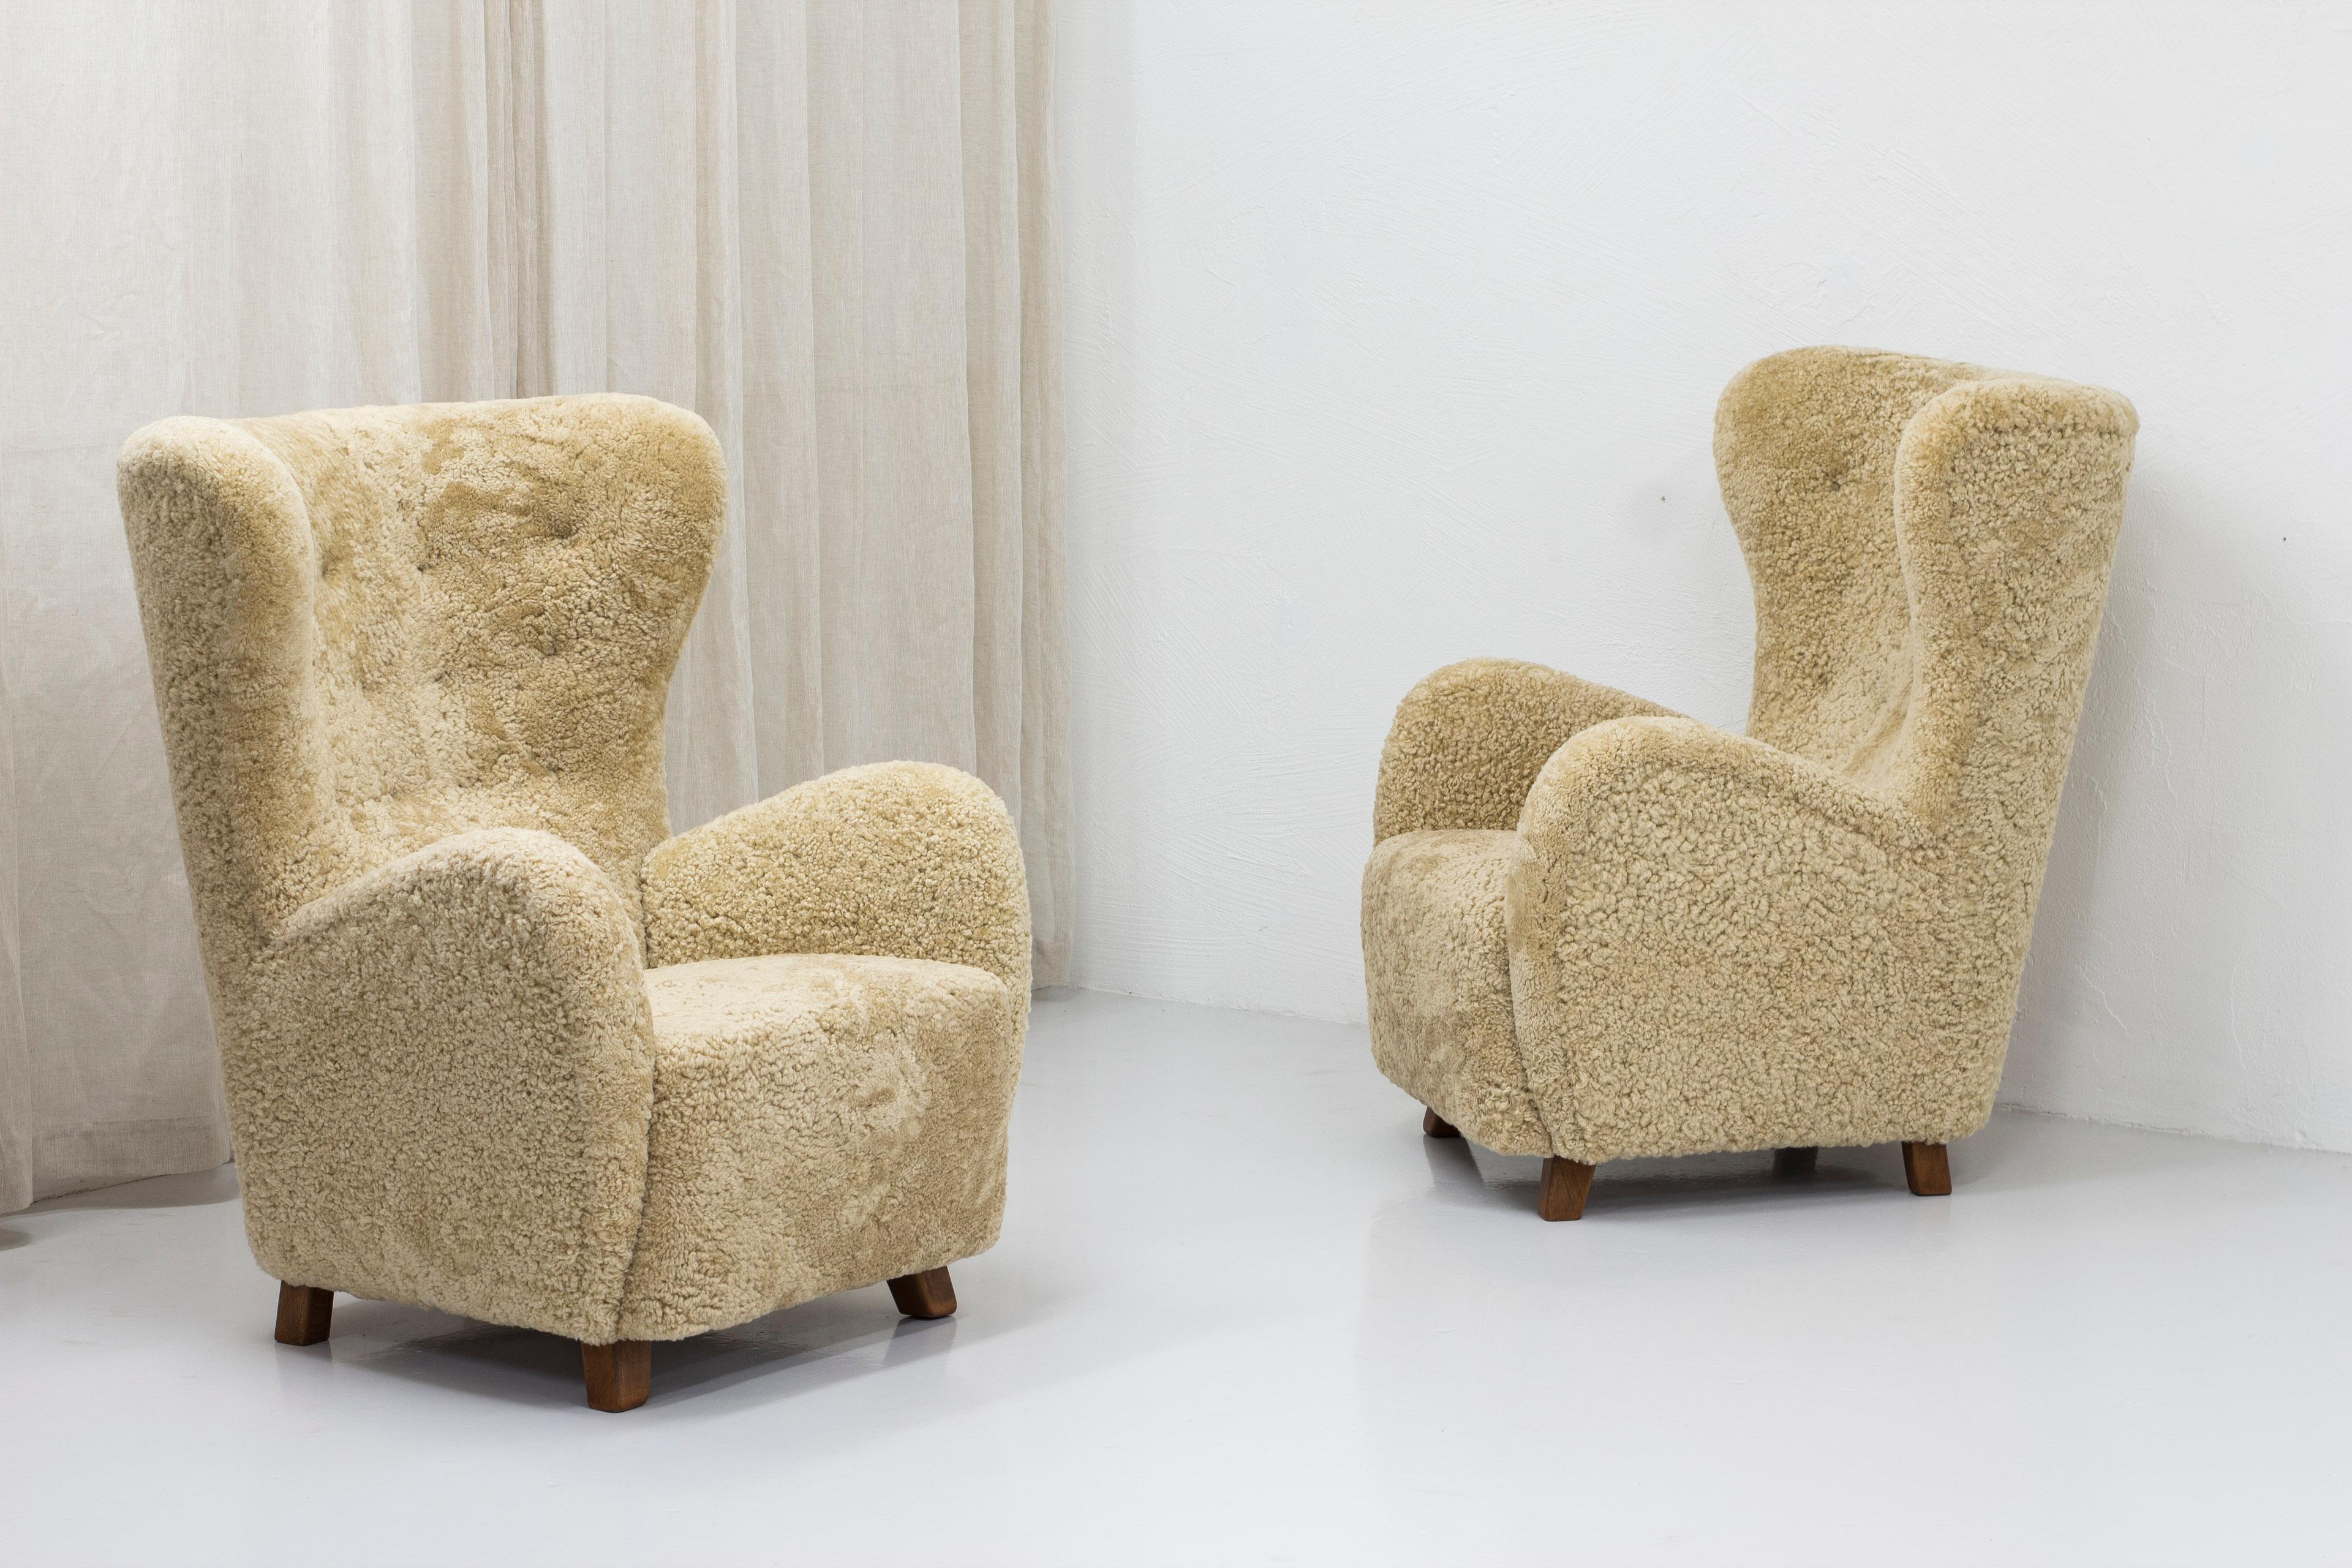 Pair of large Danish modern high back lounge chairs. Designed and made in Denmark during the 1940-50s. Large and highly comfortable. The chairs have been reupholstered in high quality sheep skin in a light beige/blonde color. The legs have been